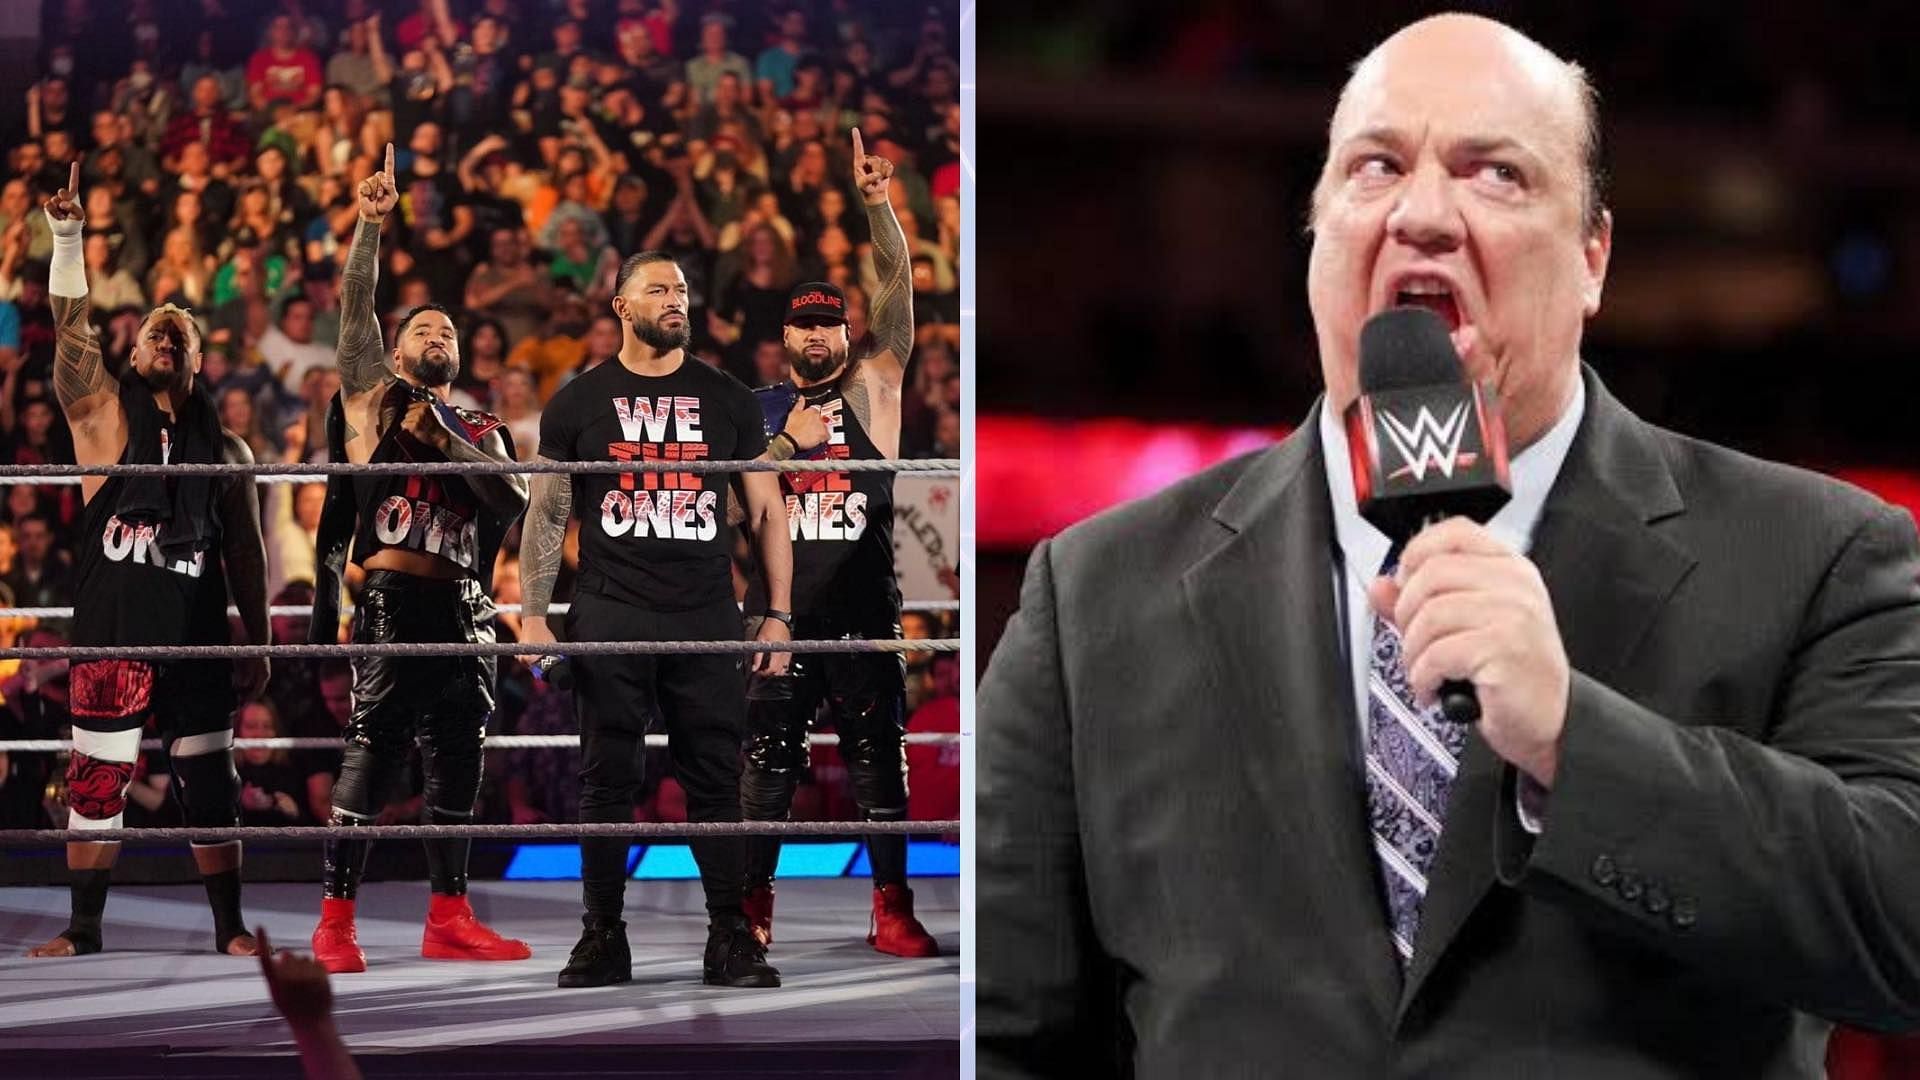 The Bloodline is issued major challenge on SmackDown; Paul Heyman furious